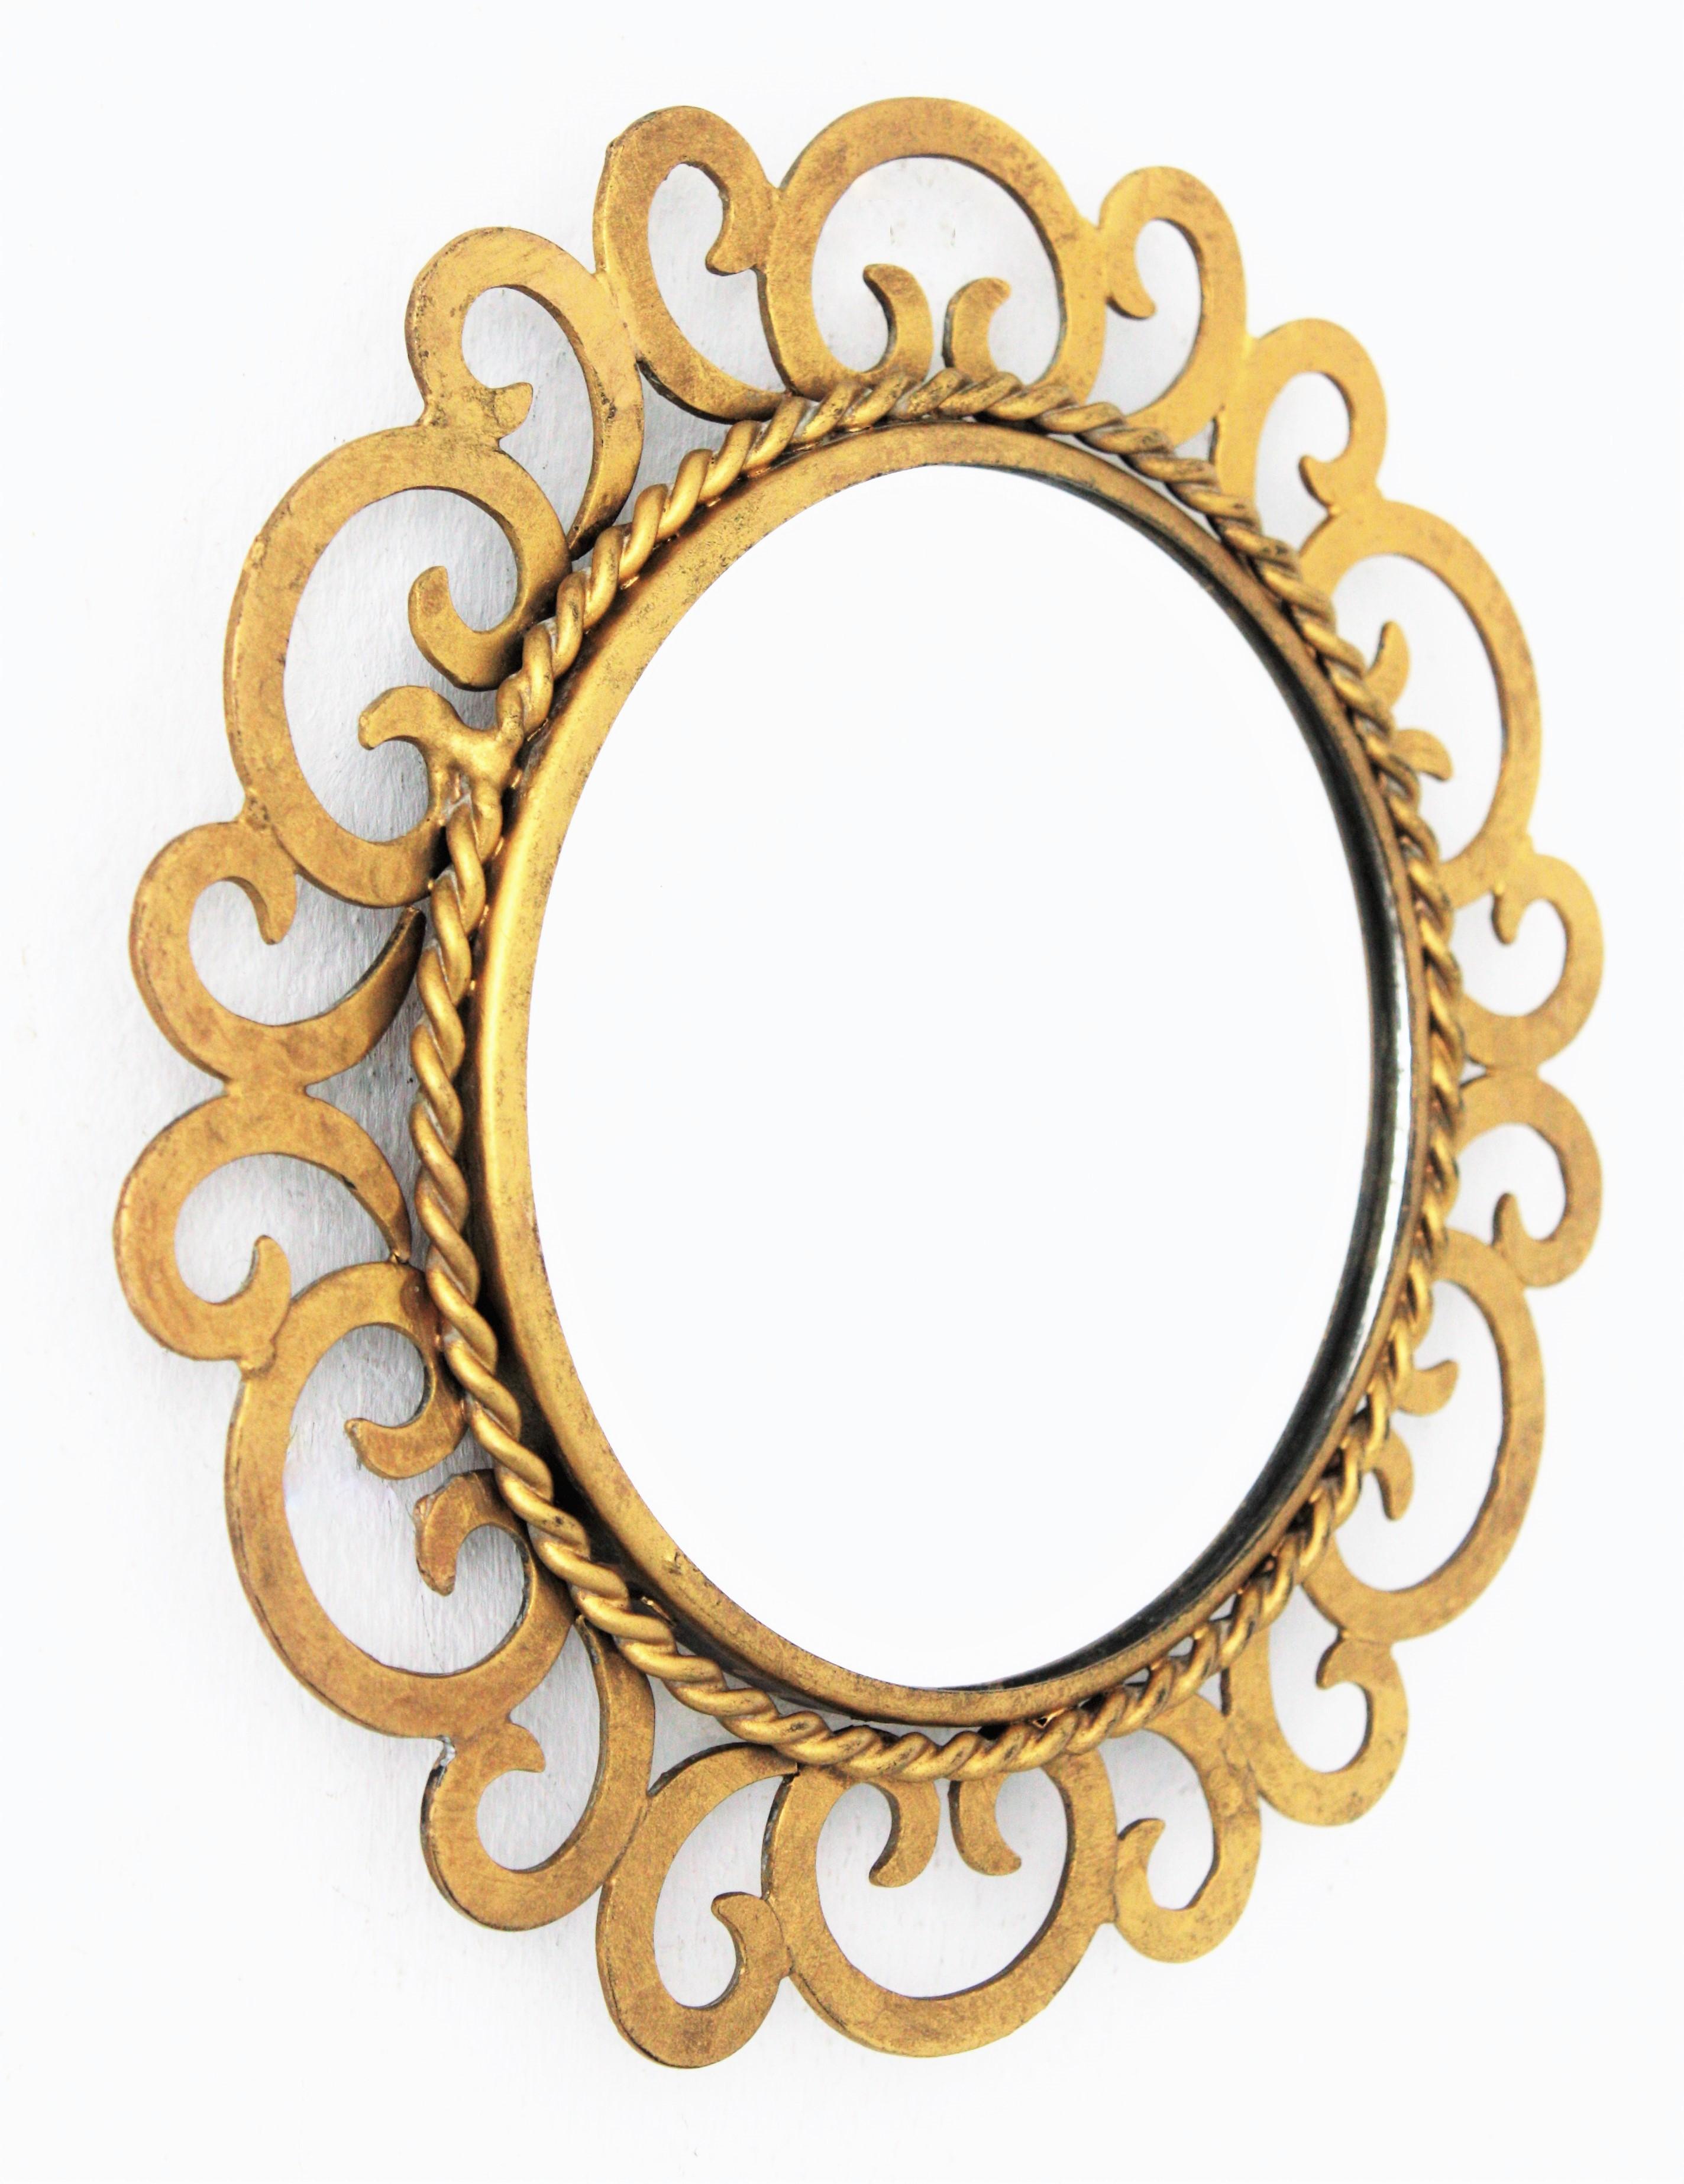 Hand-Crafted Mini Sized Sunburst Mirror with Scrollwork, Gilt Iron For Sale